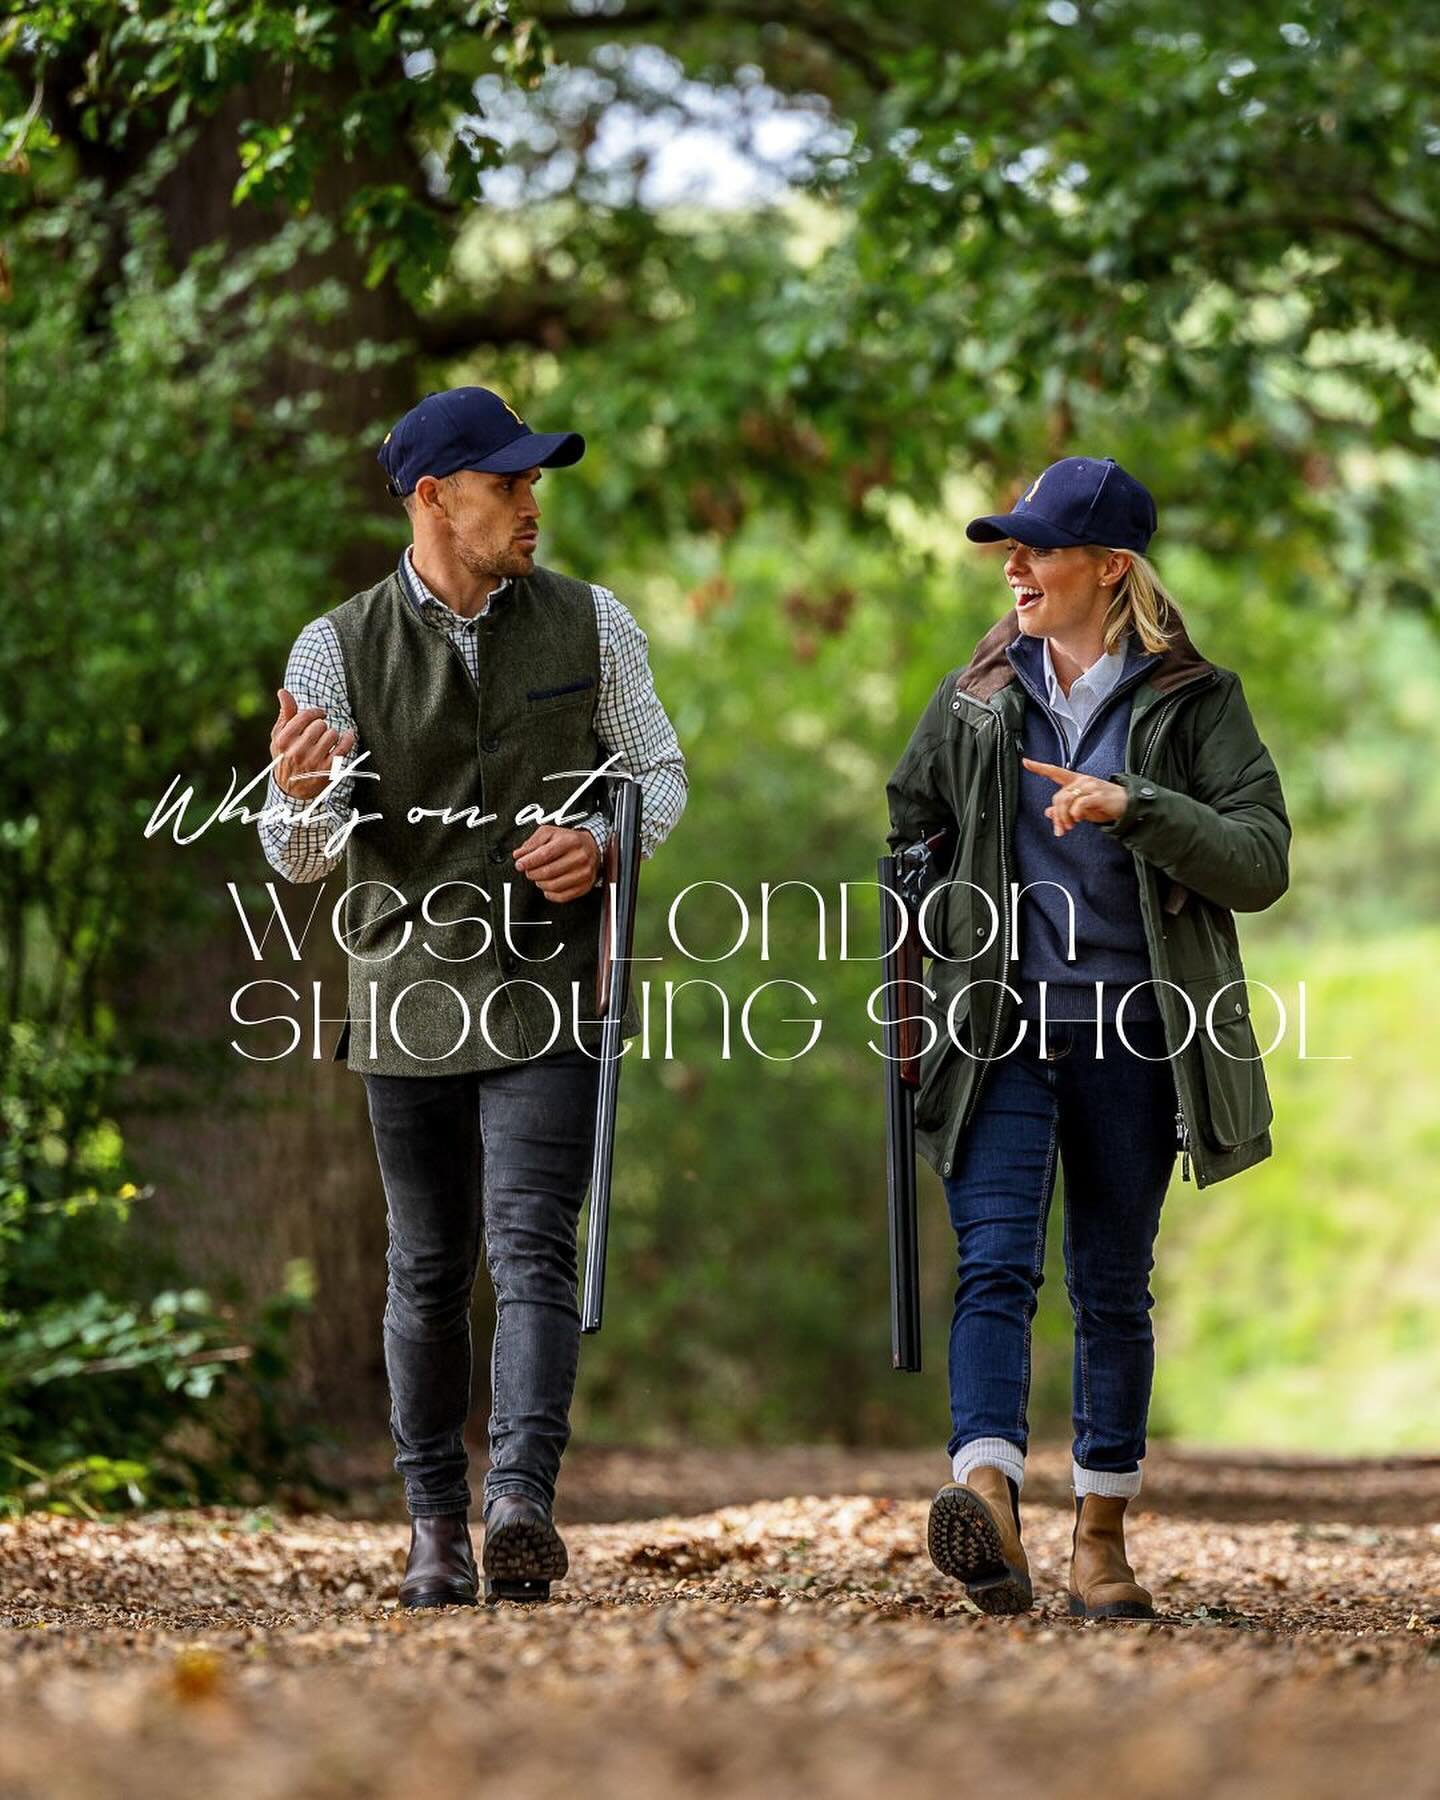 Spring has finally arrived at West London Shooting School. 🌸
 
Our wonderful client @shootingschool have some really exciting events coming up this Spring, including their Ladies Competition on Wednesday 12th May and their Simulated Syndicated Days 